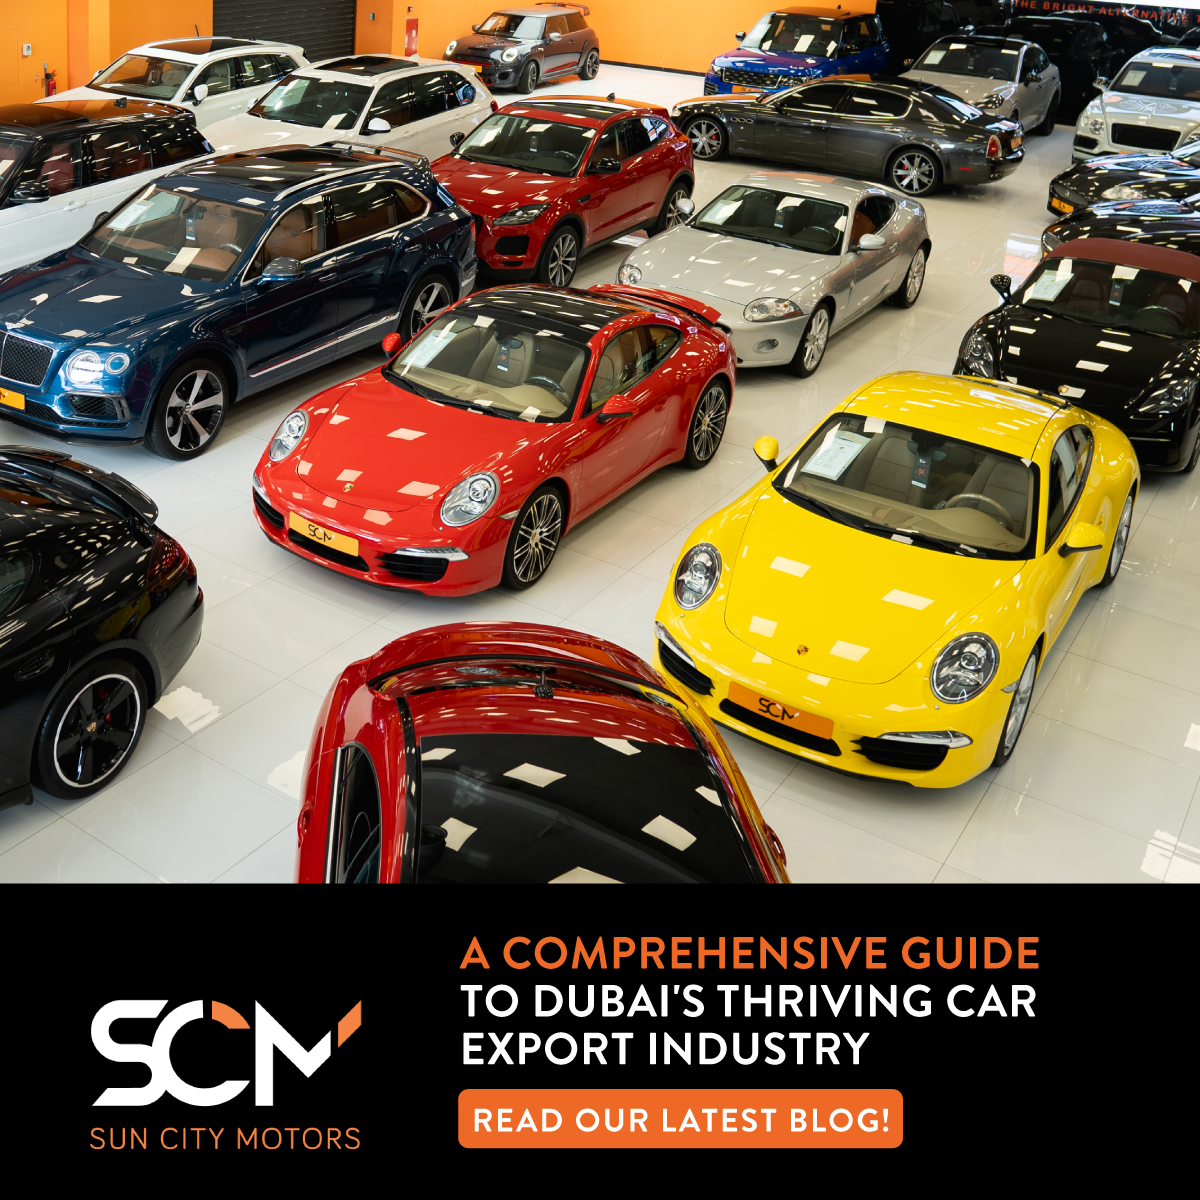 A Comprehensive Guide to Dubai’s Thriving Car Export Industry